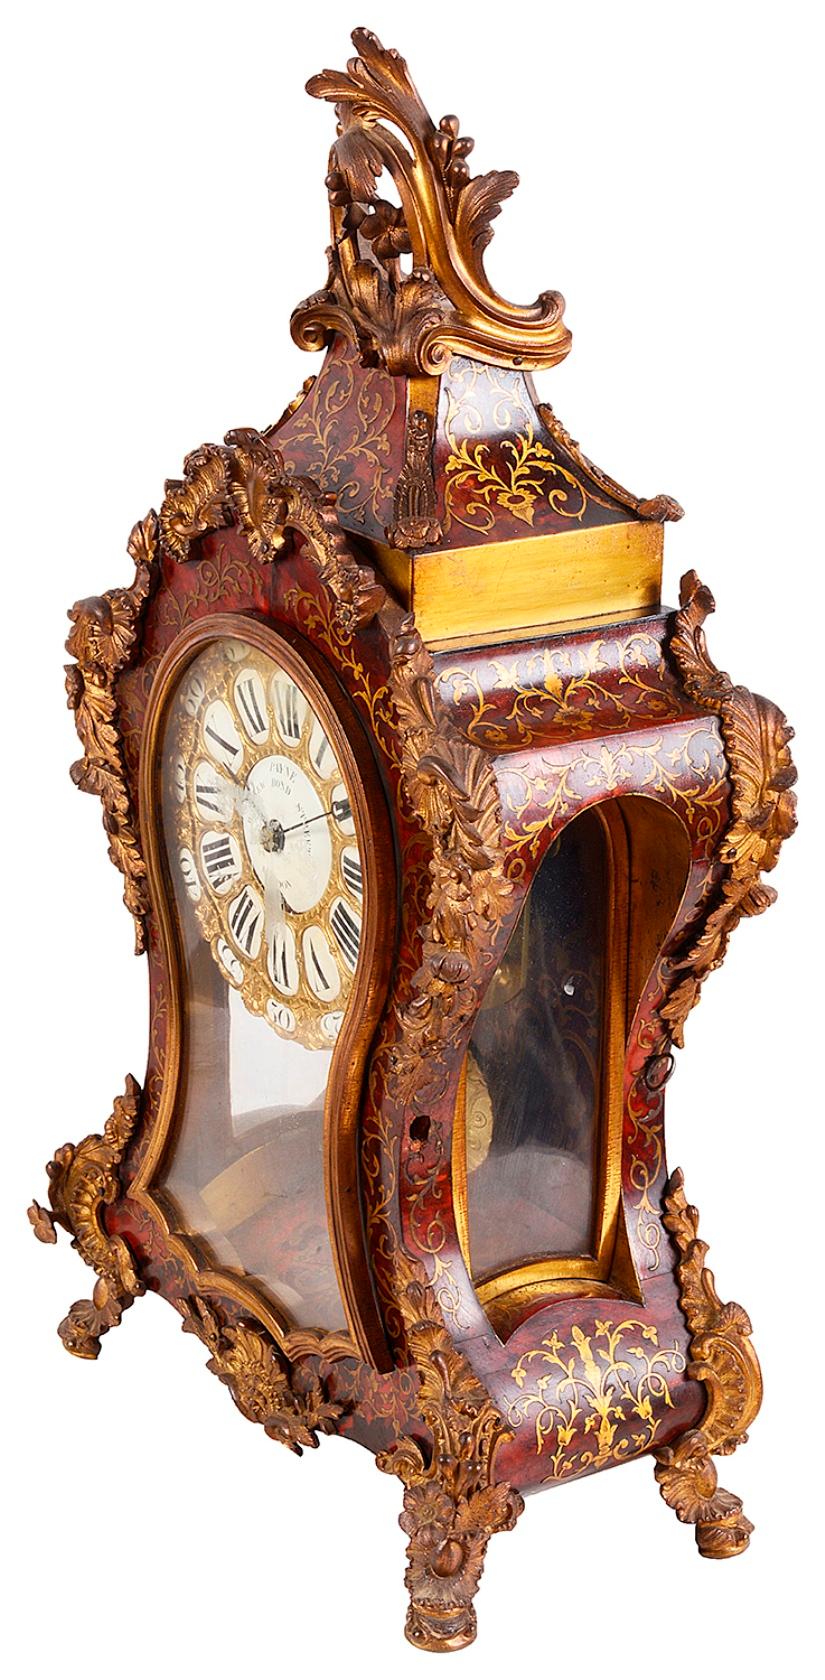 A very good quality 19th century French boulle mantel clock with wonderful scrolling foliate ormolu mounts to the surround, brass inlay to the red tortoiseshell. White enamel roman numerals to the eight day duration movement that chimes on the hour